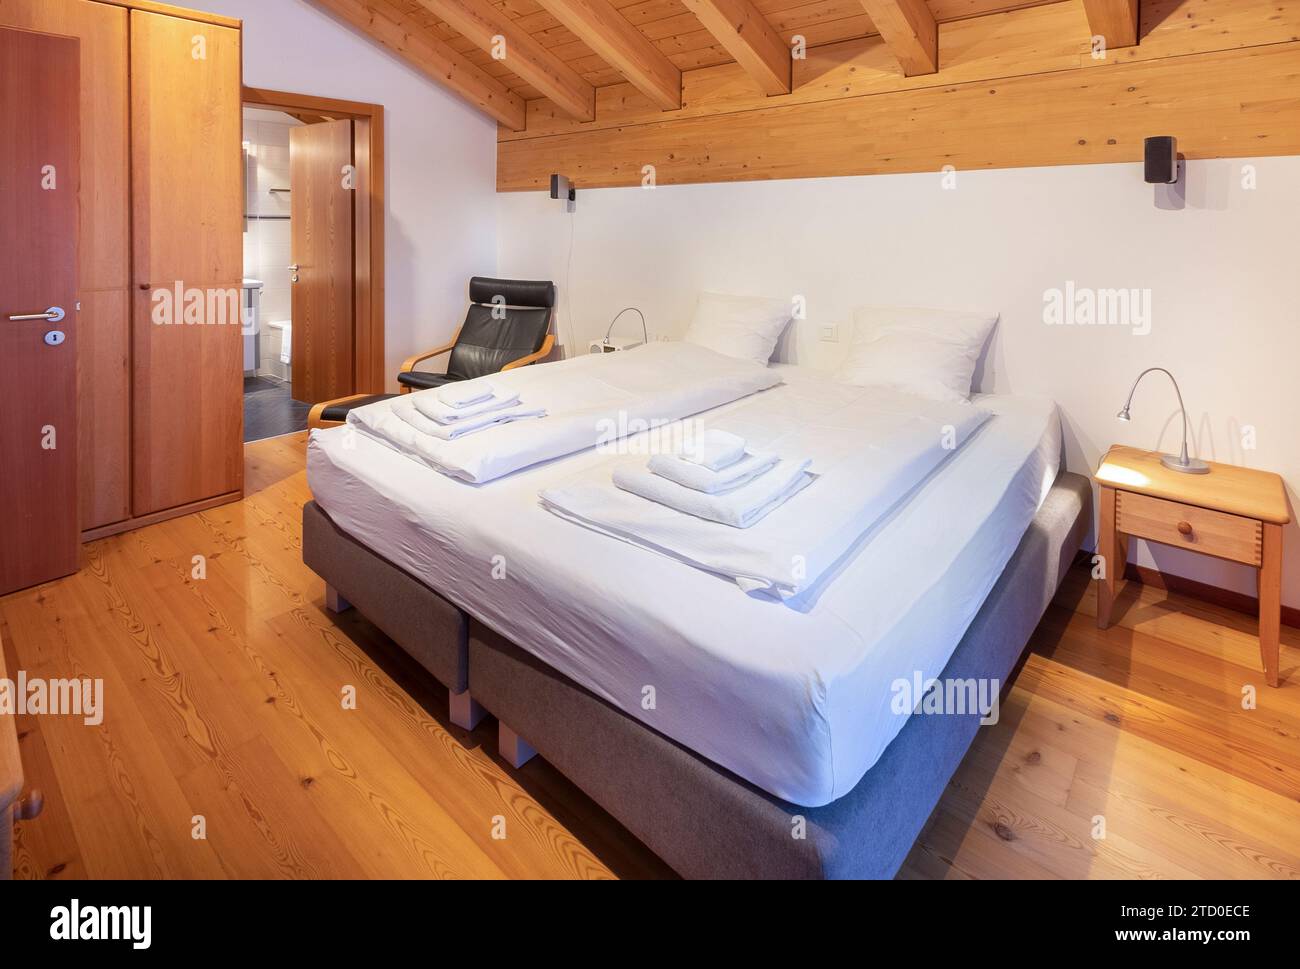 A warm and inviting wooden chalet bedroom interior with neat bedding and traditional furnishings, reflecting the rustic charm of Zermatt accommodation Stock Photo